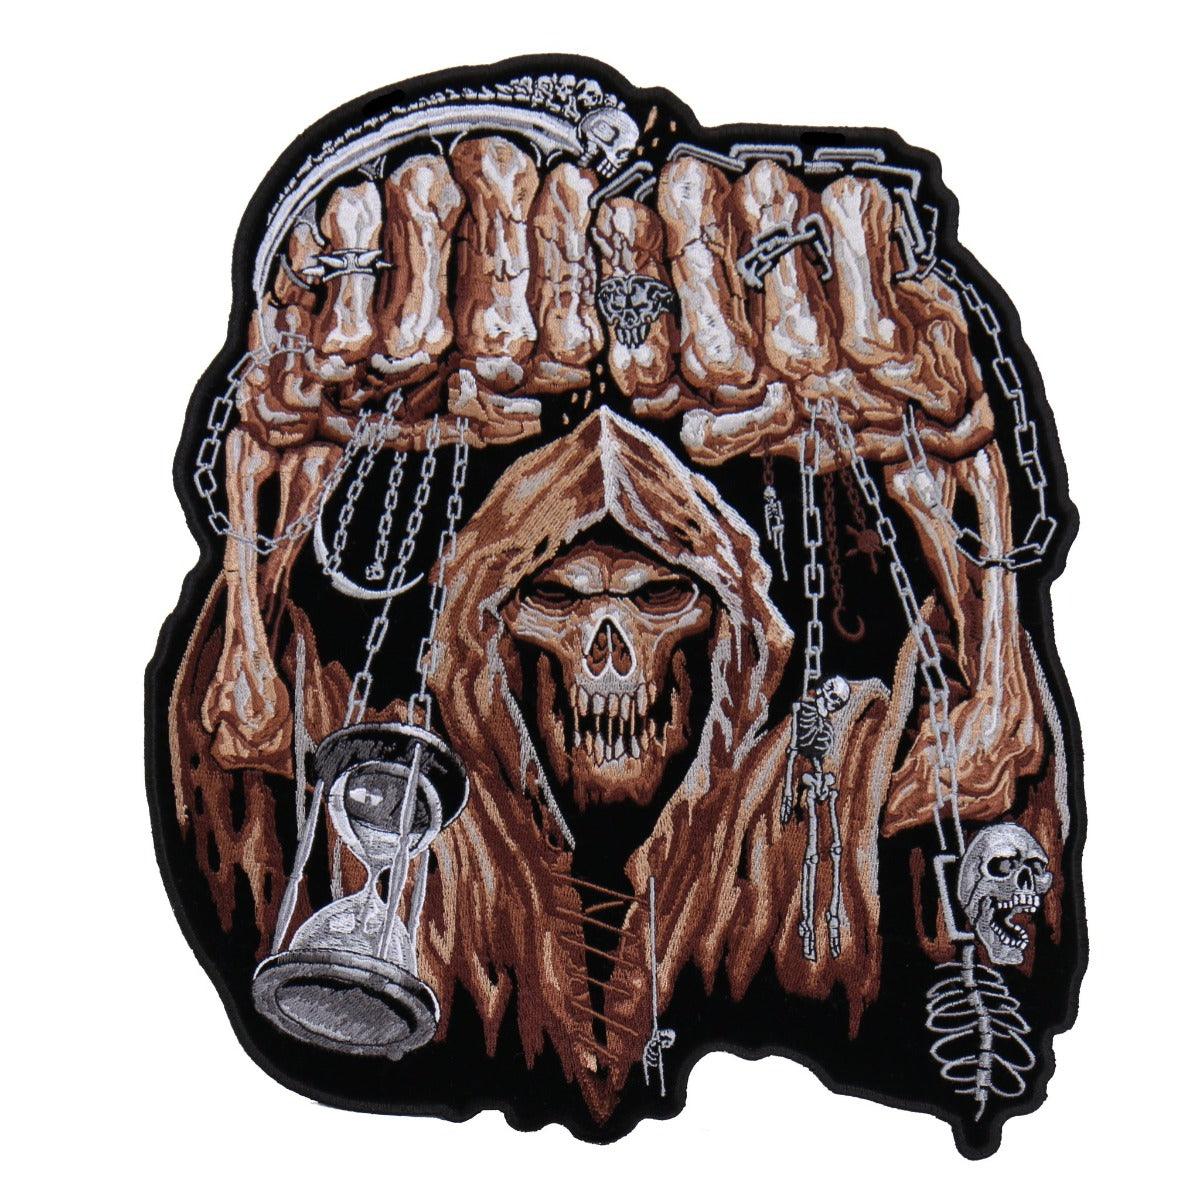 Hot Leathers Patch Huge Fist Skull 10" - American Legend Rider